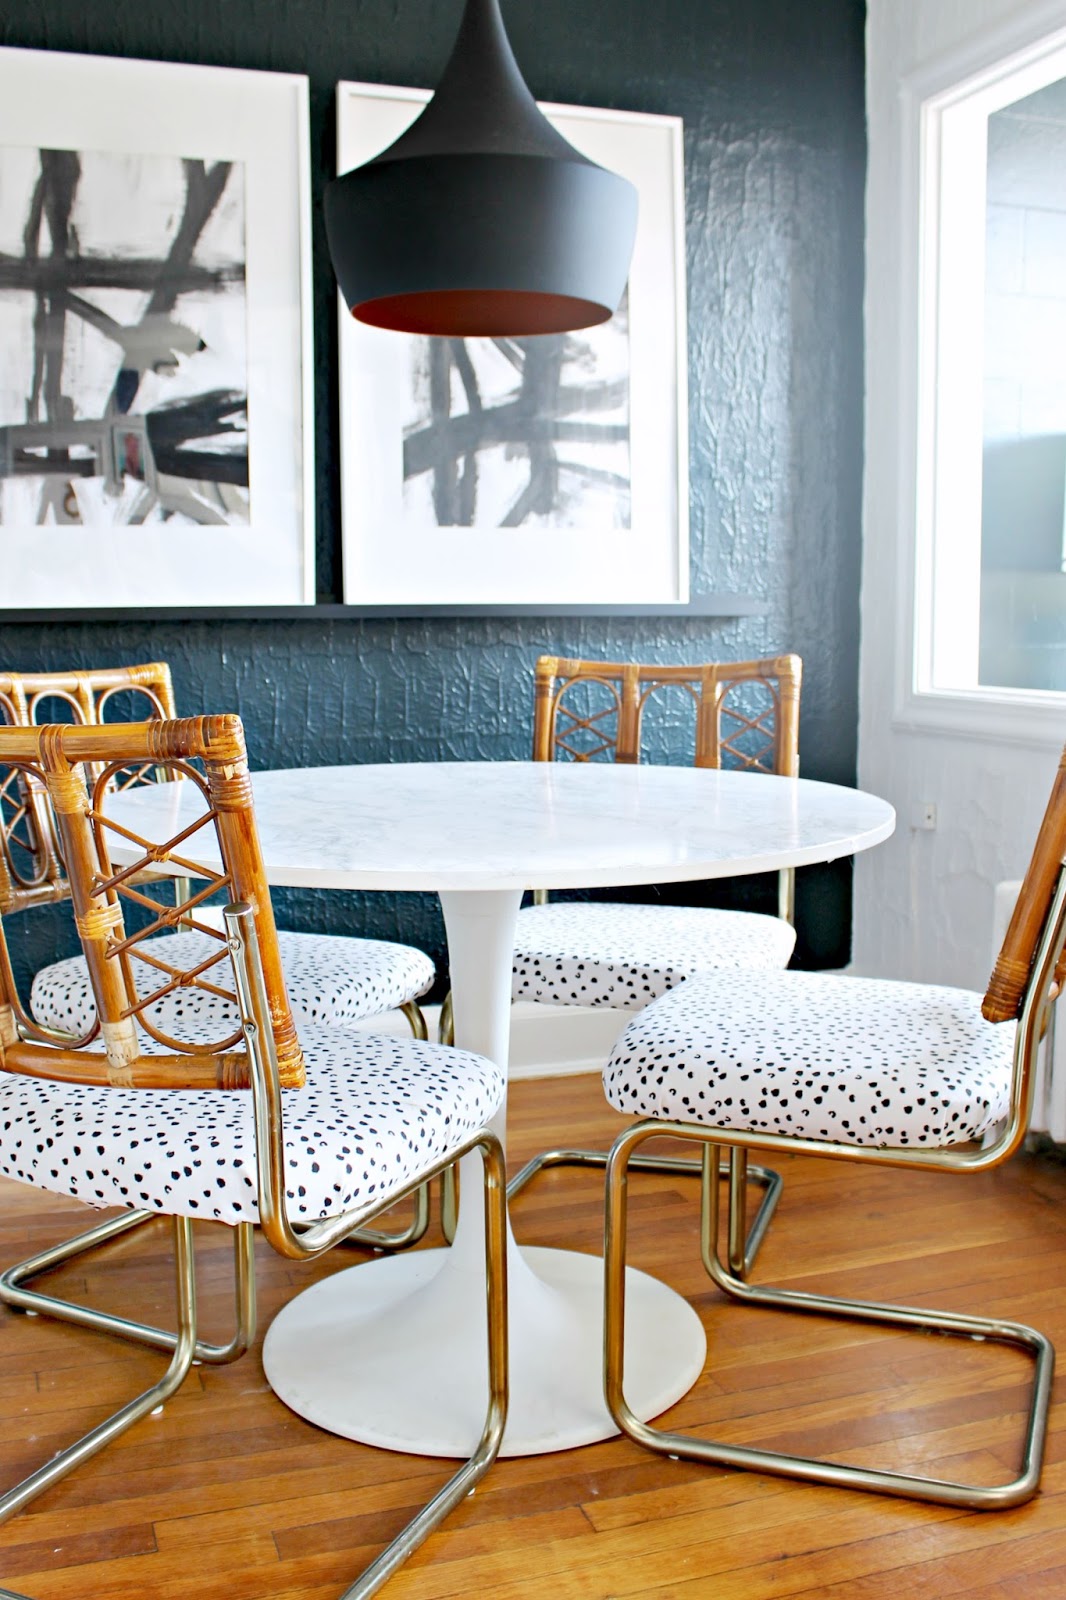 Diy Upholstered Craigslist Chairs Shannon Claire